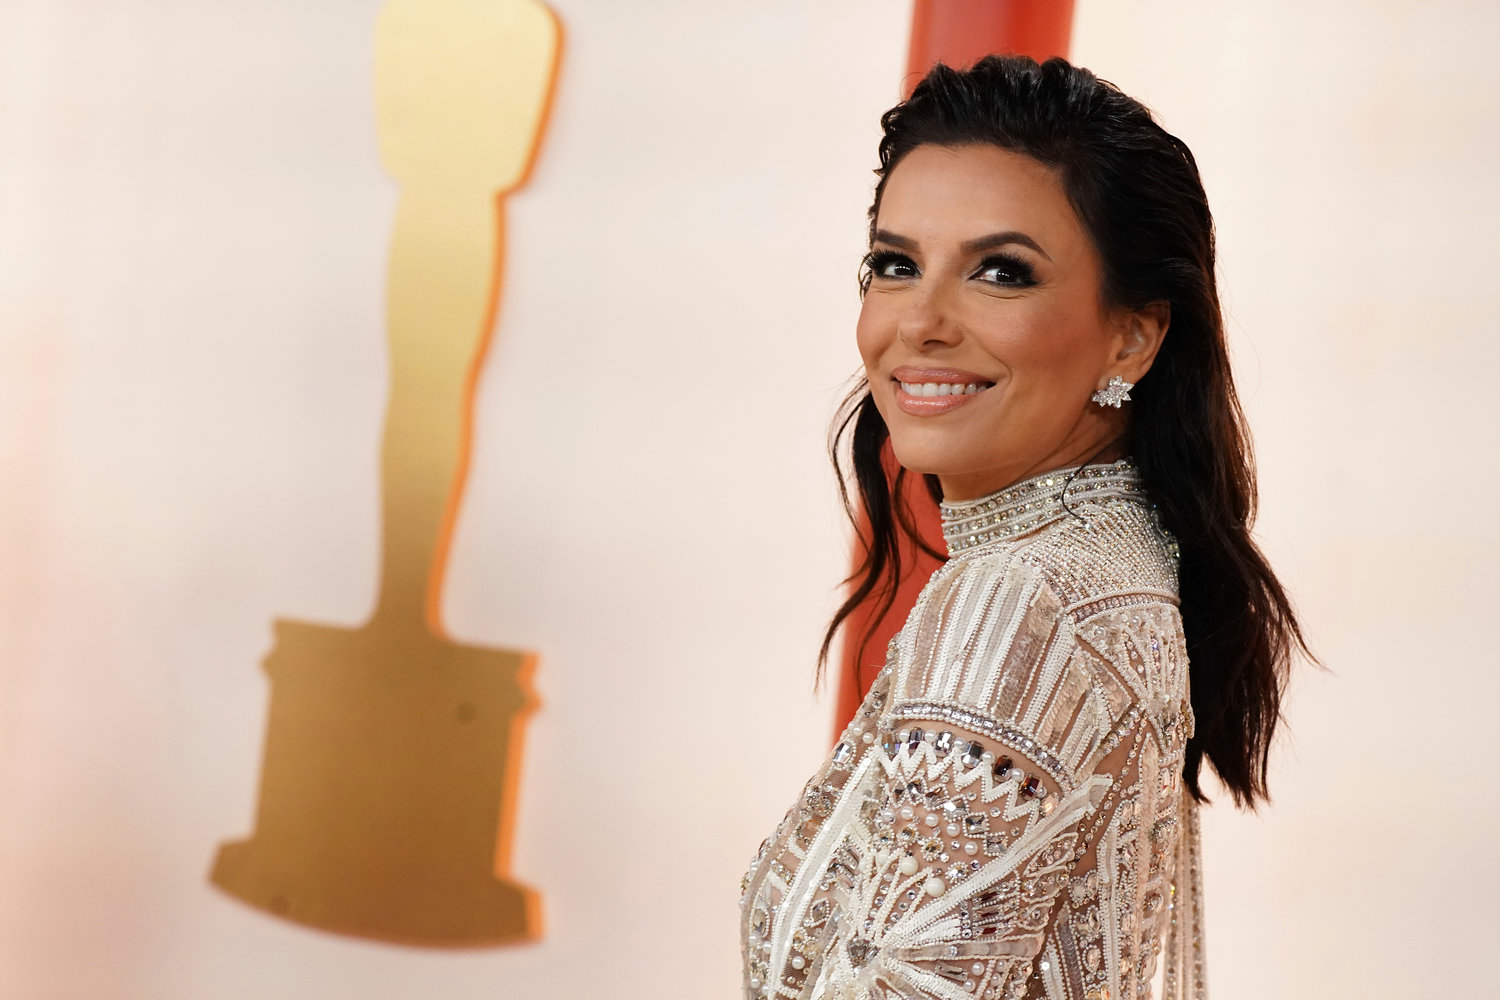 Eva Longoria arrives at the Oscars on Sunday, March 12, 2023, at the Dolby Theatre in Los Angeles. (Photo by Jordan Strauss/Invision/AP)